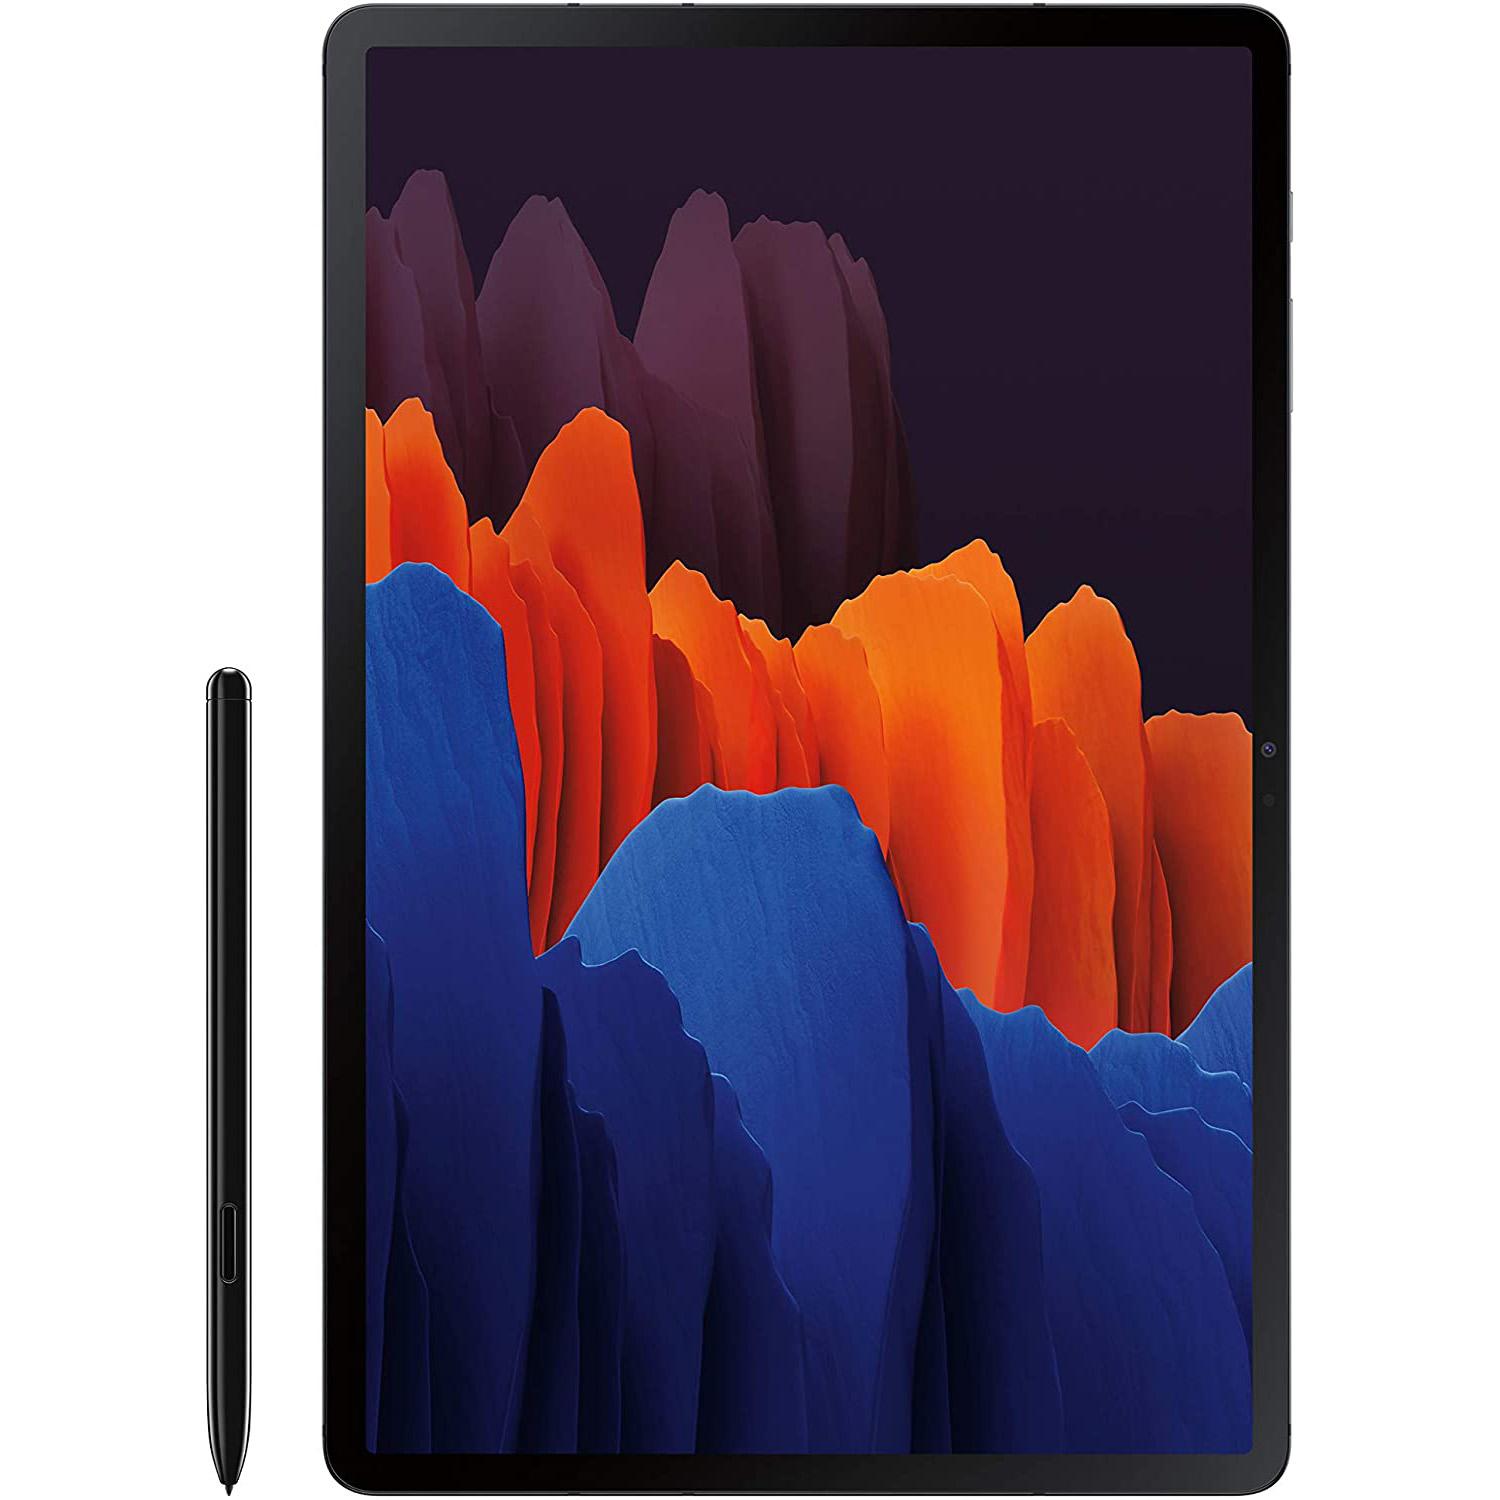 256GB Samsung Galaxy Tab S7 11in Tablet with S Pen for $579.99 Shipped